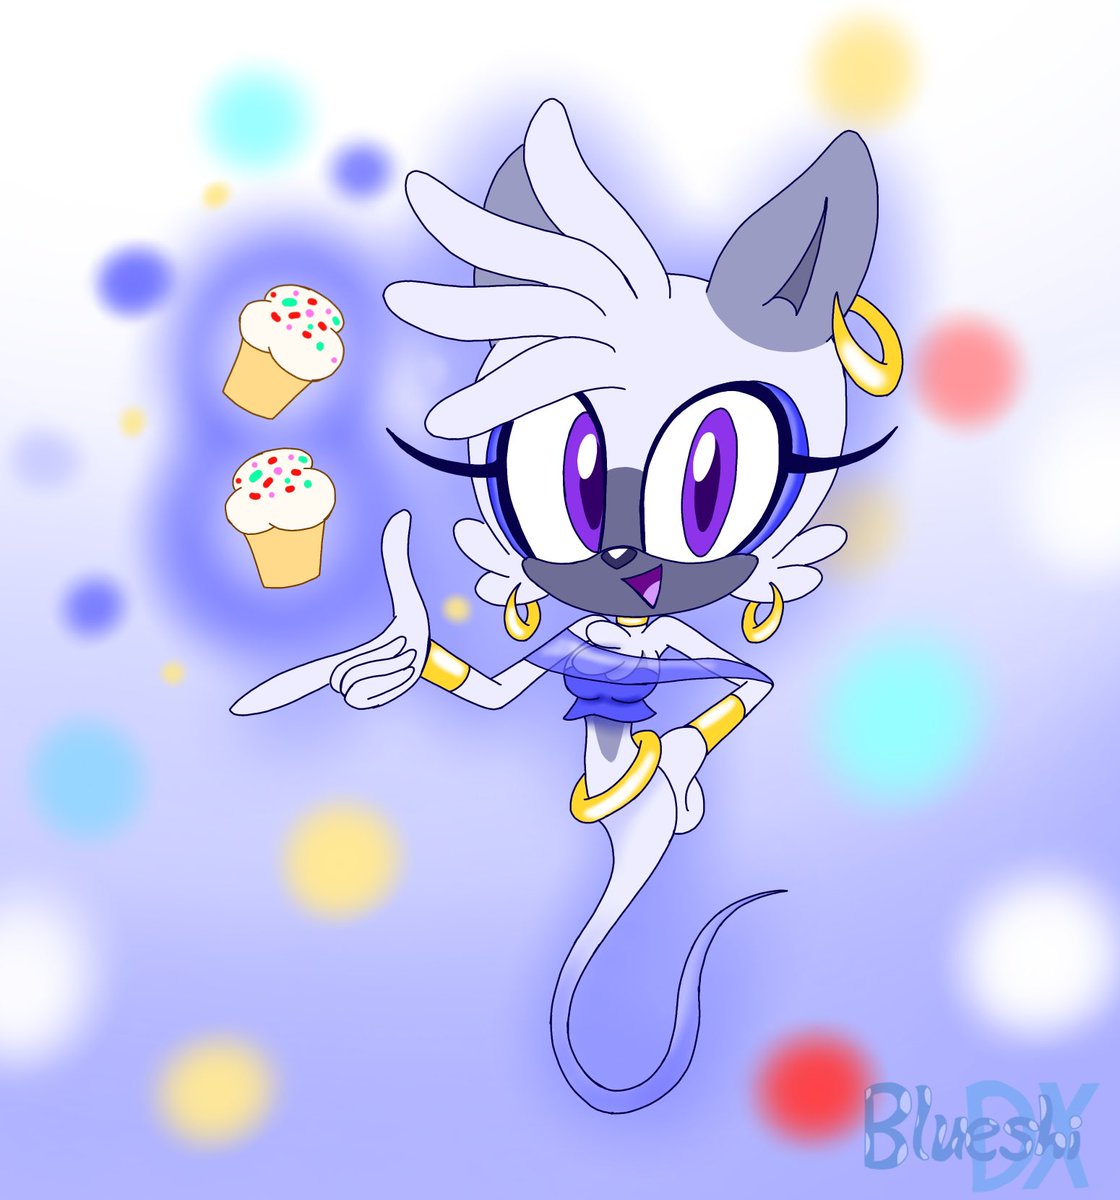 Seems to be Tangle’s birthday today, but something seems off here. Wonder what it is. Hope ya like btw!

#sonicidw #TangleTheLemur #sonicfanart #genie #ArtistOnTwitter